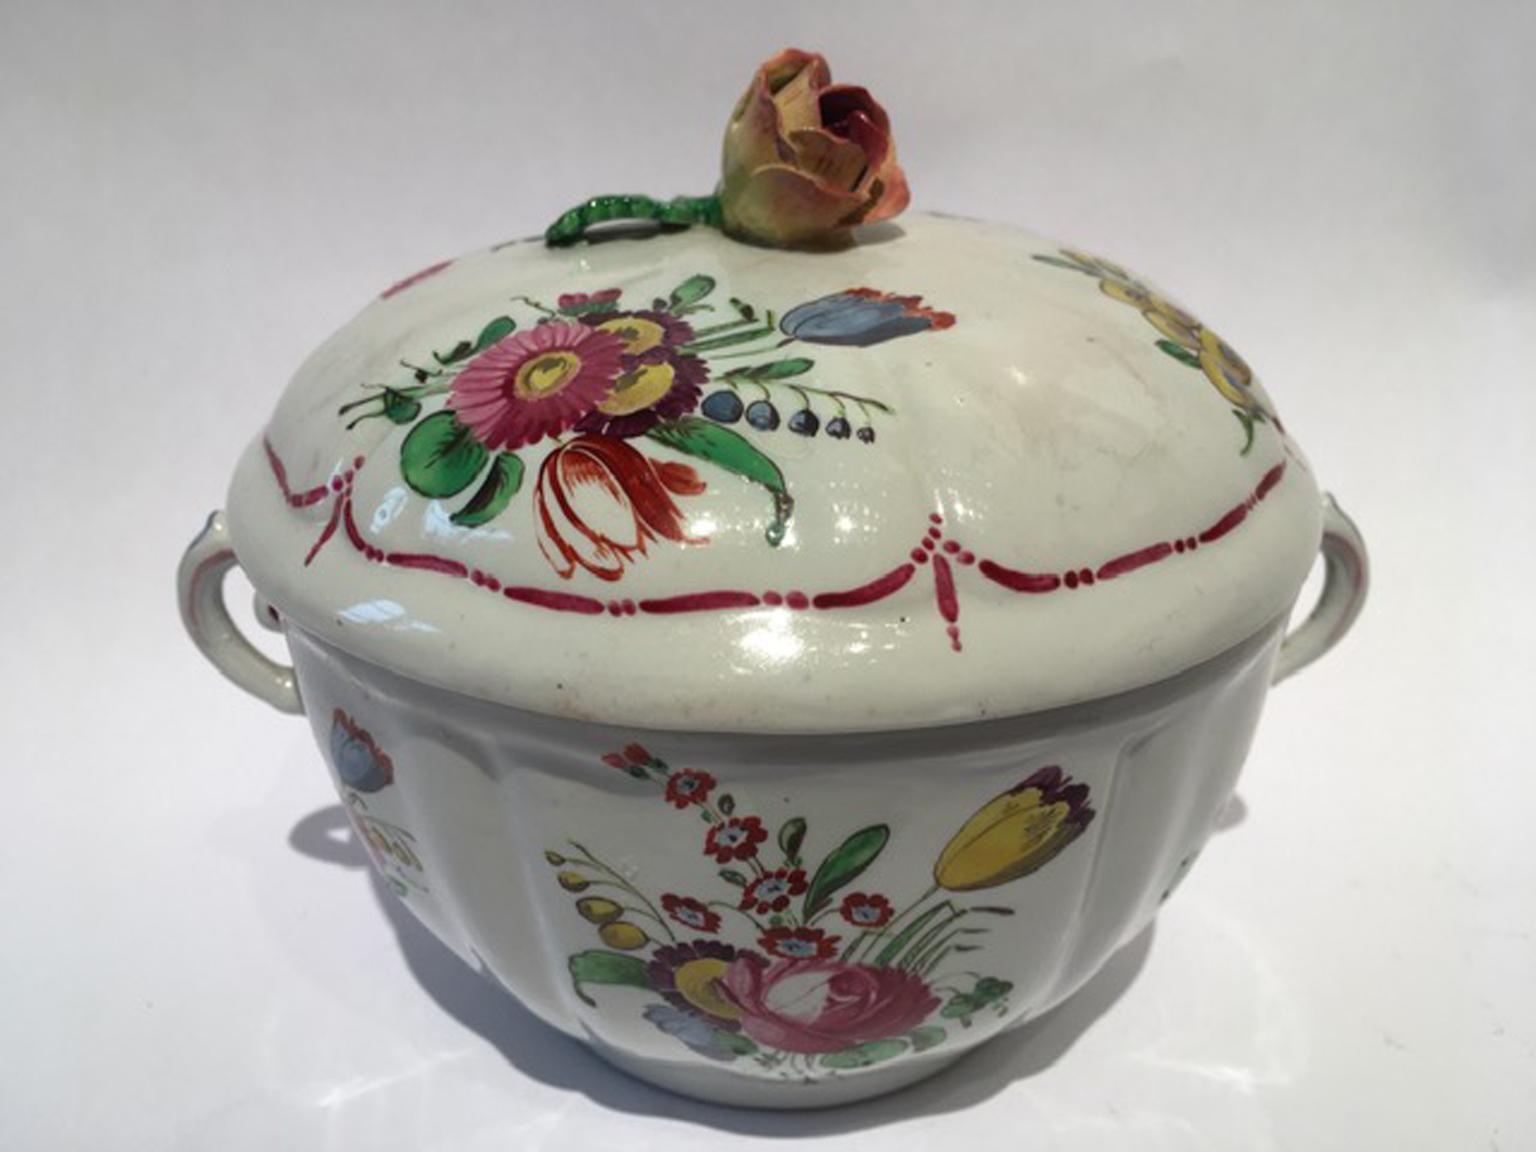 Italy 18th Century Richard Ginori Porcelain Covered Cup or Sugar Bowl For Sale 6